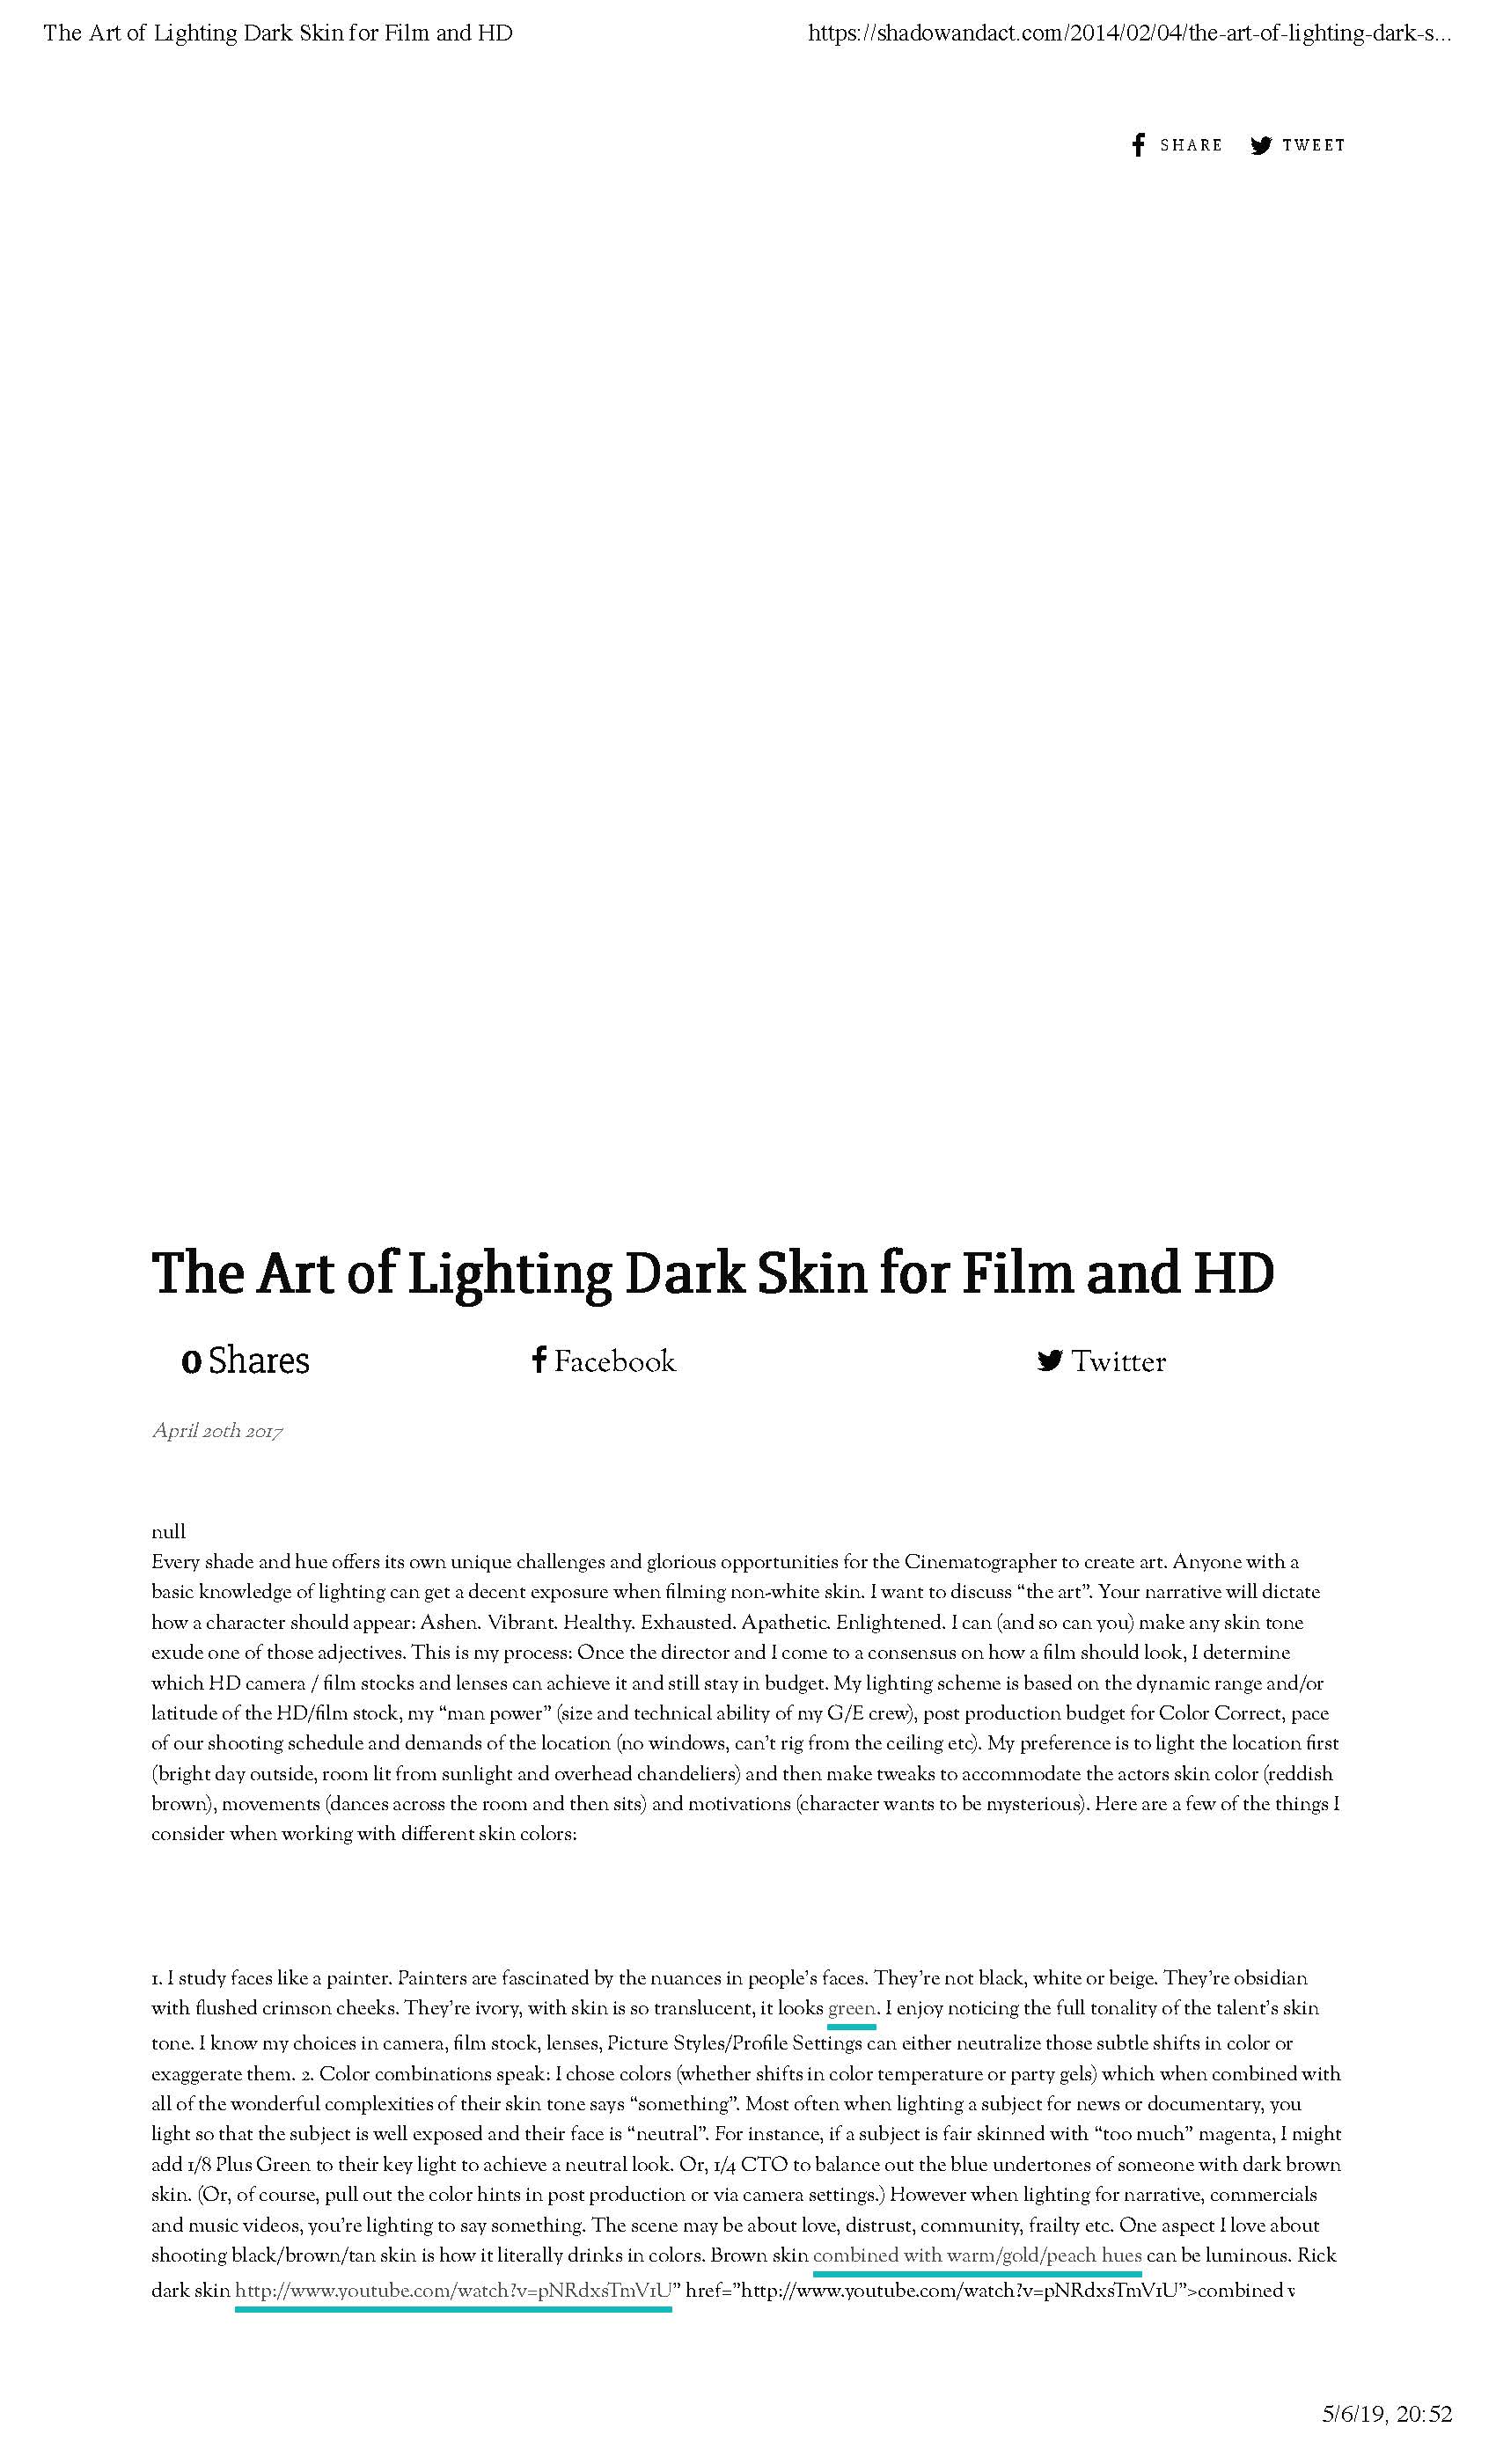 The Art of Lighting Dark Skin for Film and HD_Page_1.jpg